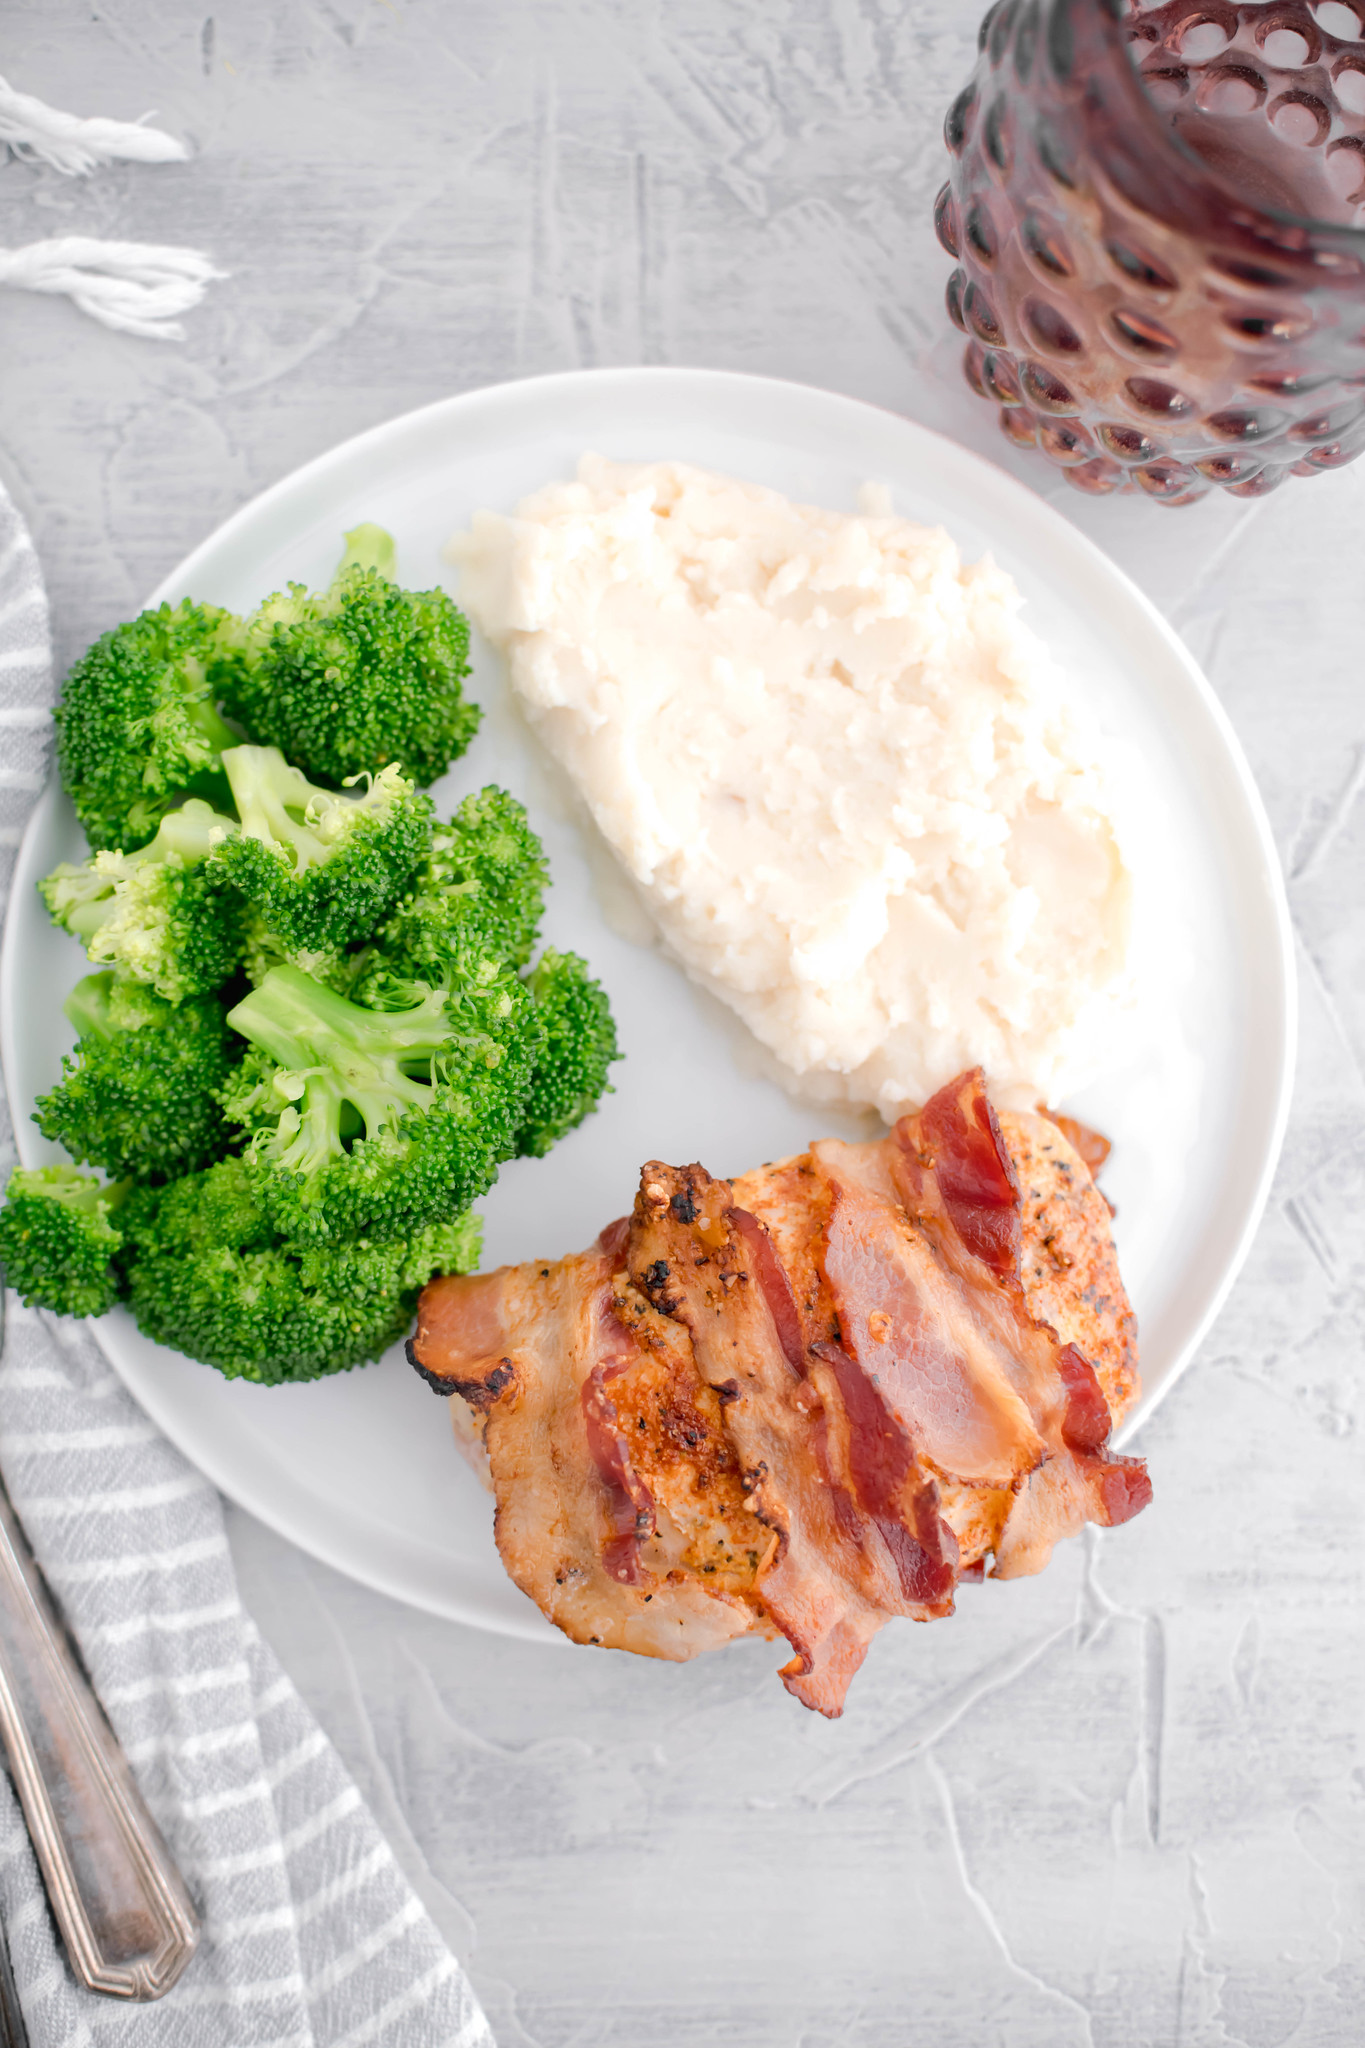 Round white plate filled with bacon wrapped pork chop, steamed broccoli and mashed potatoes.